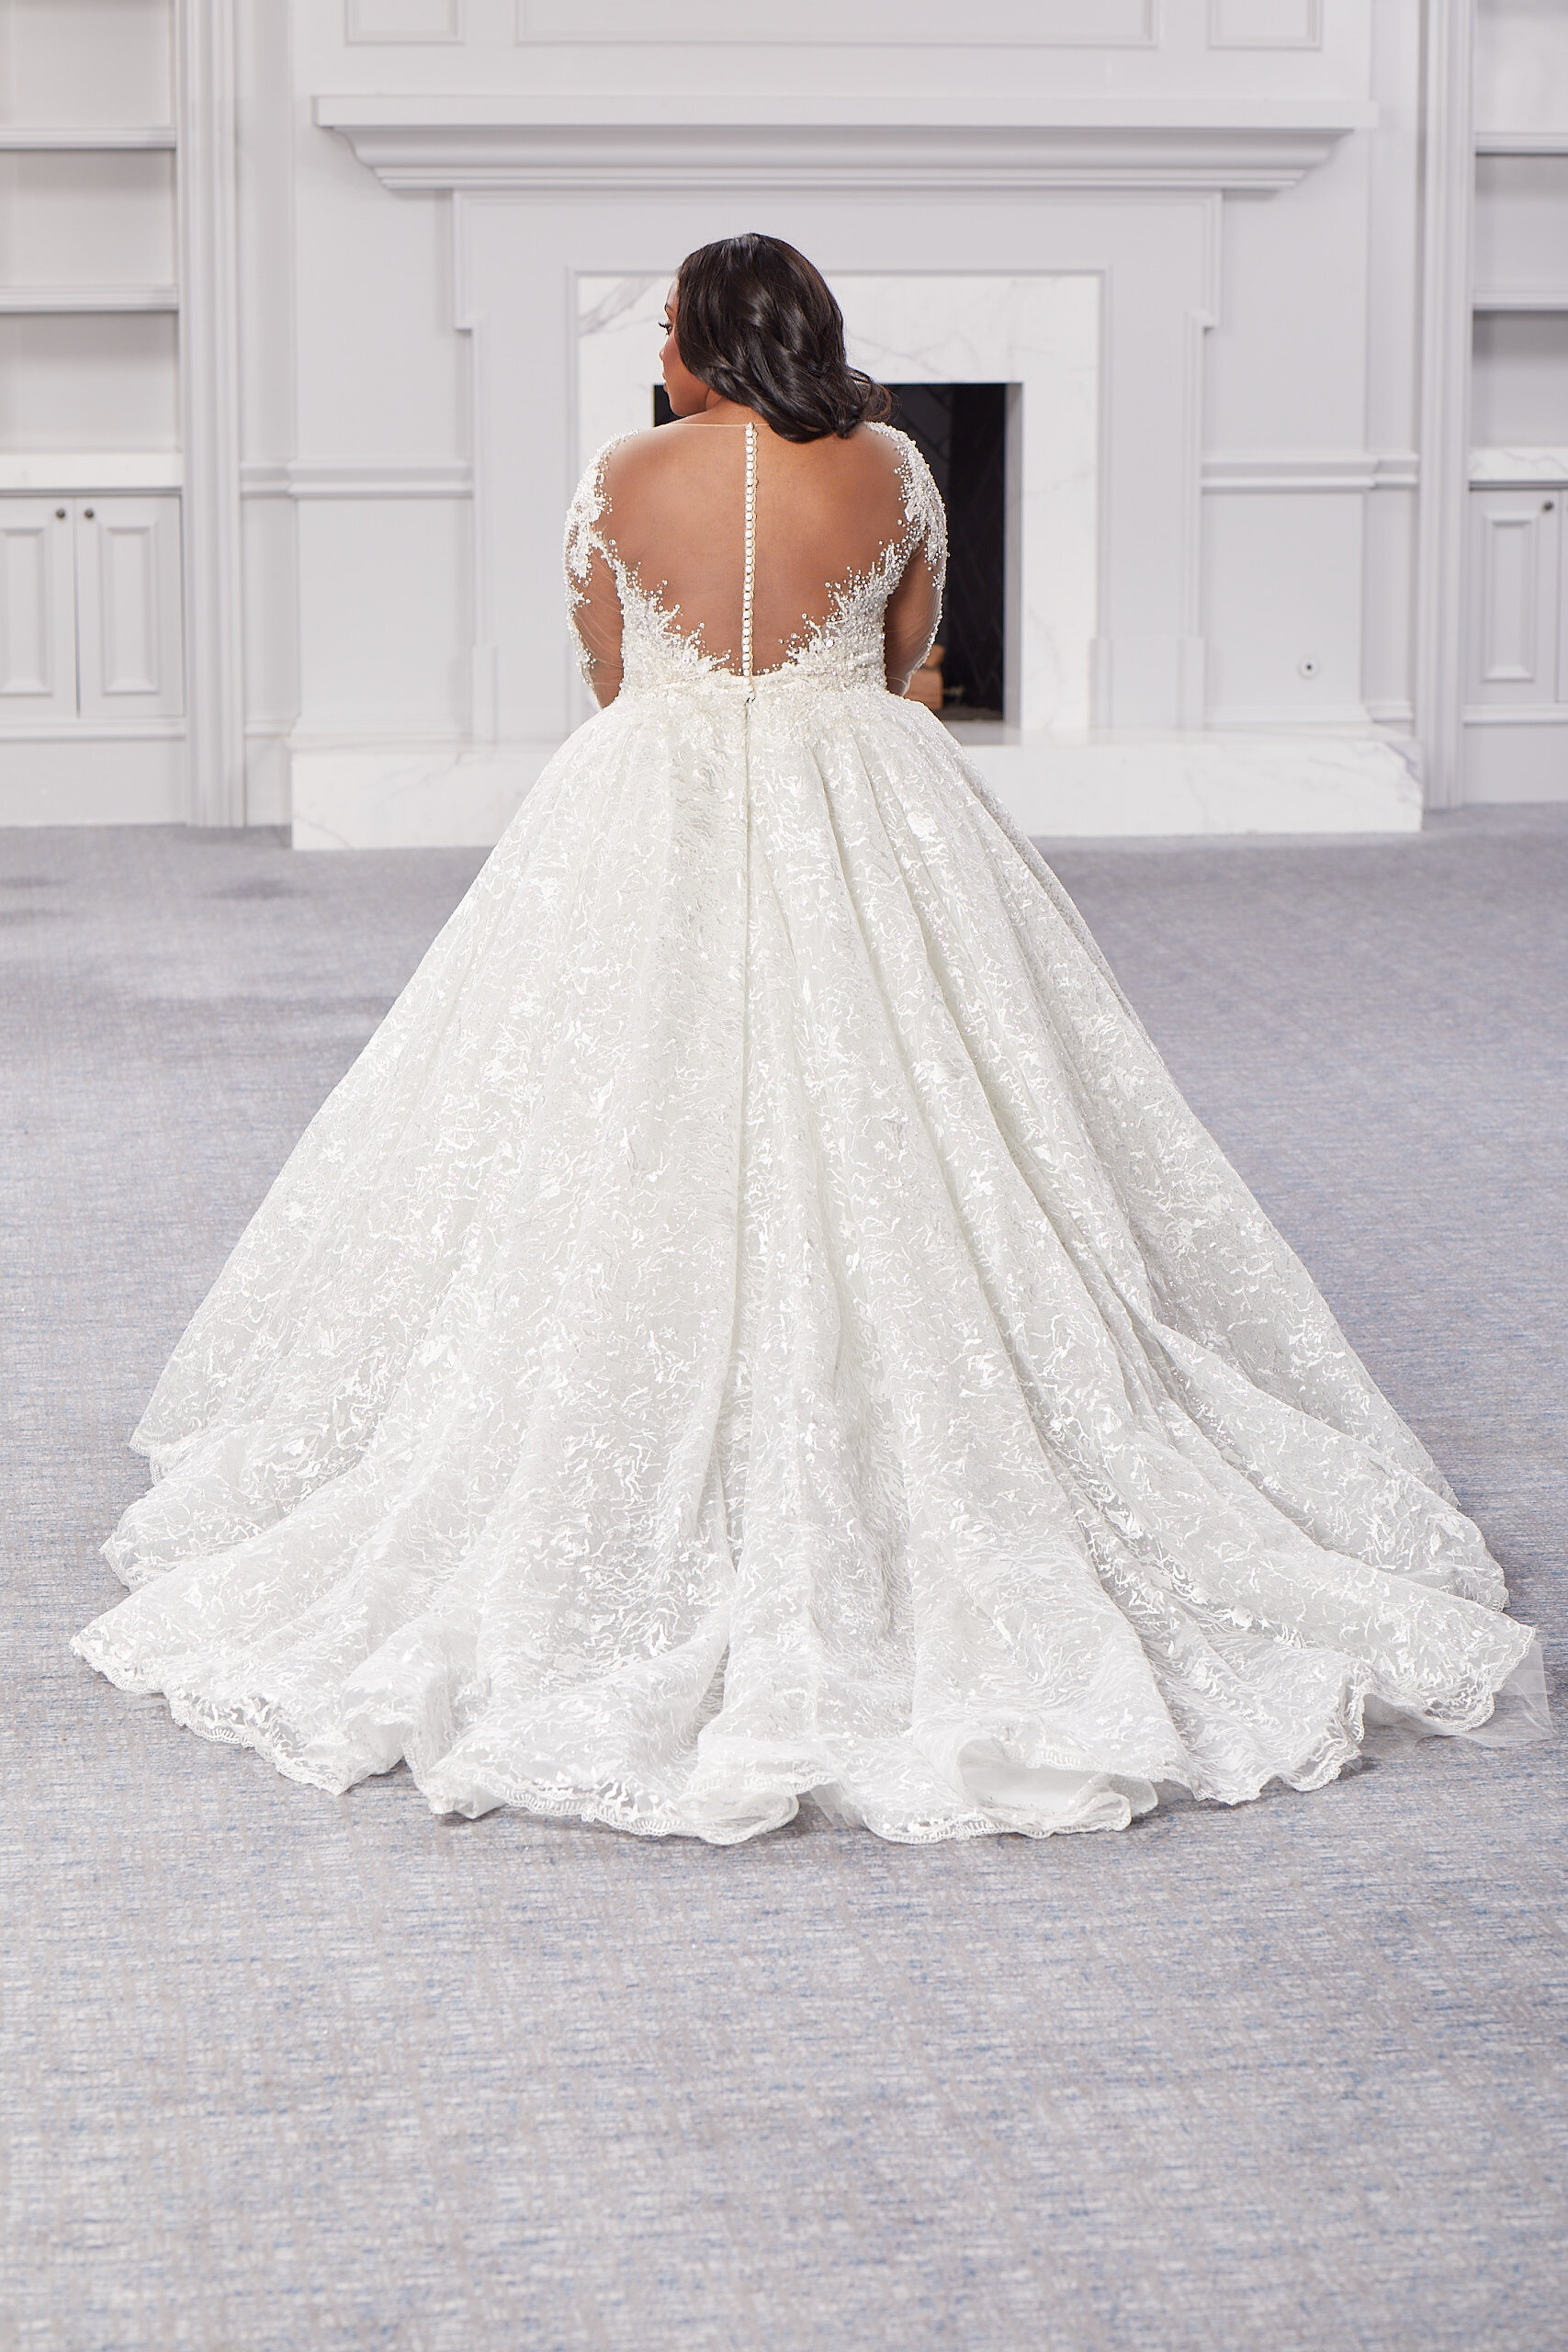 Brides-by-Young-Plus-Size-Bridal-Curvy-Wedding-Dress-New-Jersey-Indiana-Chicago-Illinois-DP_392_0487.jpg